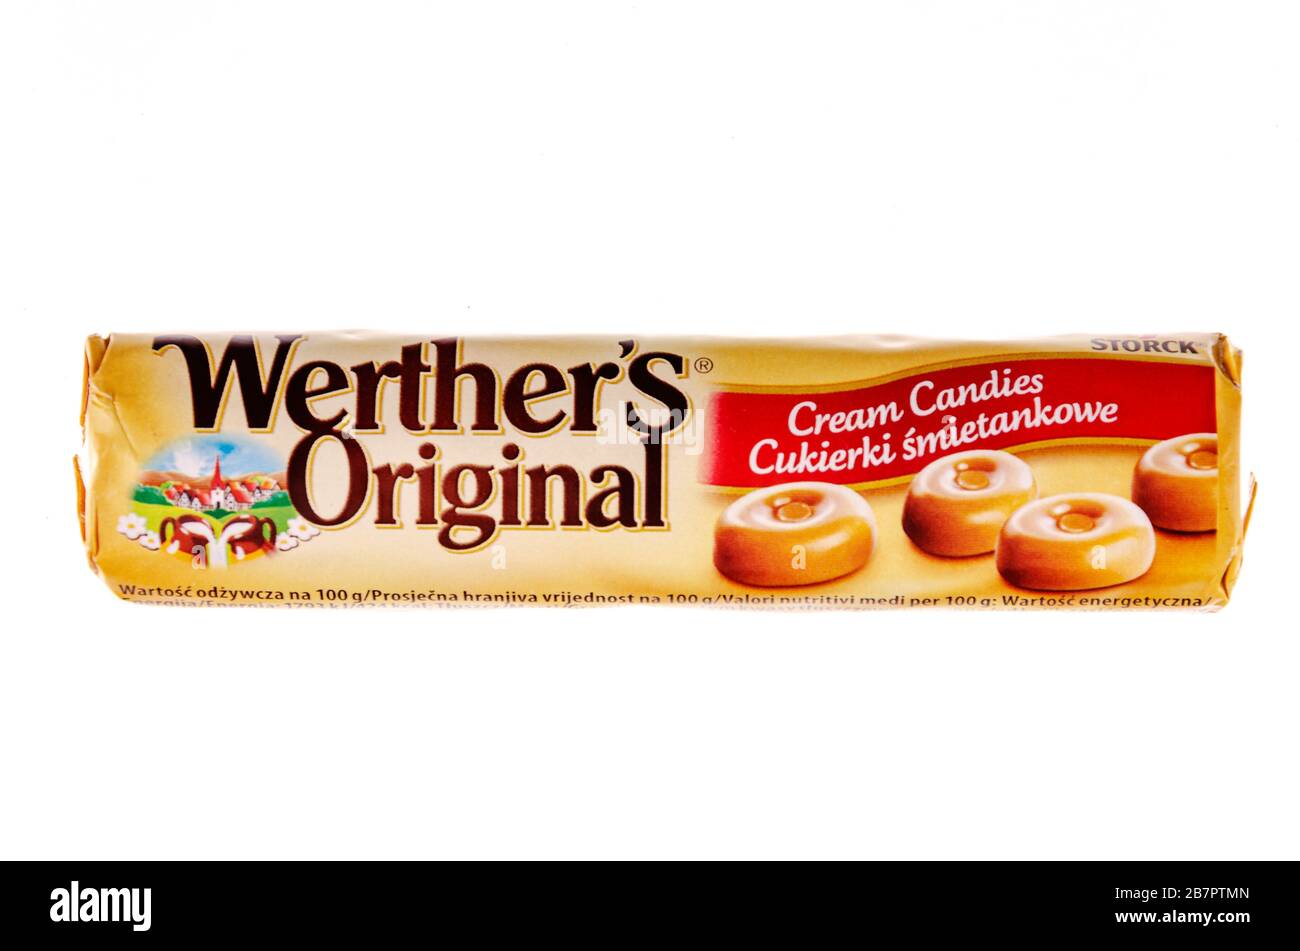 Werthers Original classic cream candies on white background. They are produced by German company August Storck KG, based in Berlin Stock Photo